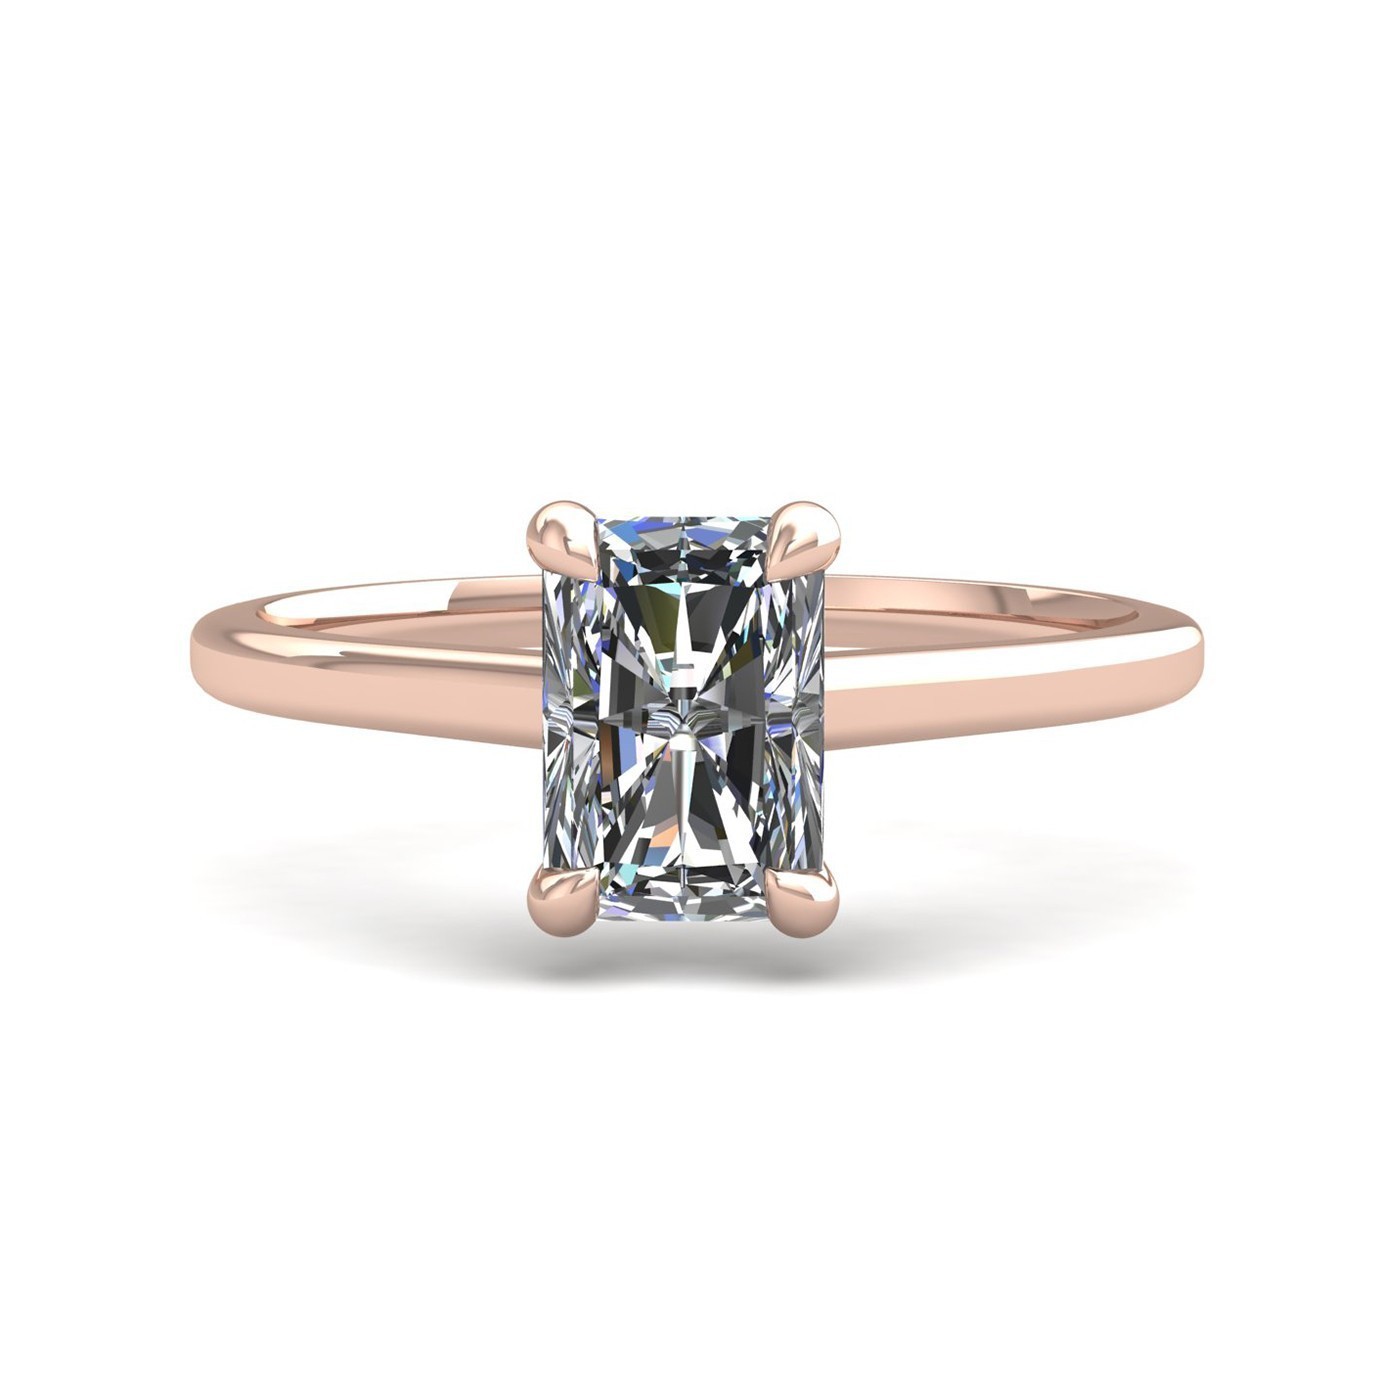 18K ROSE GOLD 4 PRONGS SOLITAIRE RADIANT CUT DIAMOND ENGAGEMENT RING WITH WHISPER THIN BAND